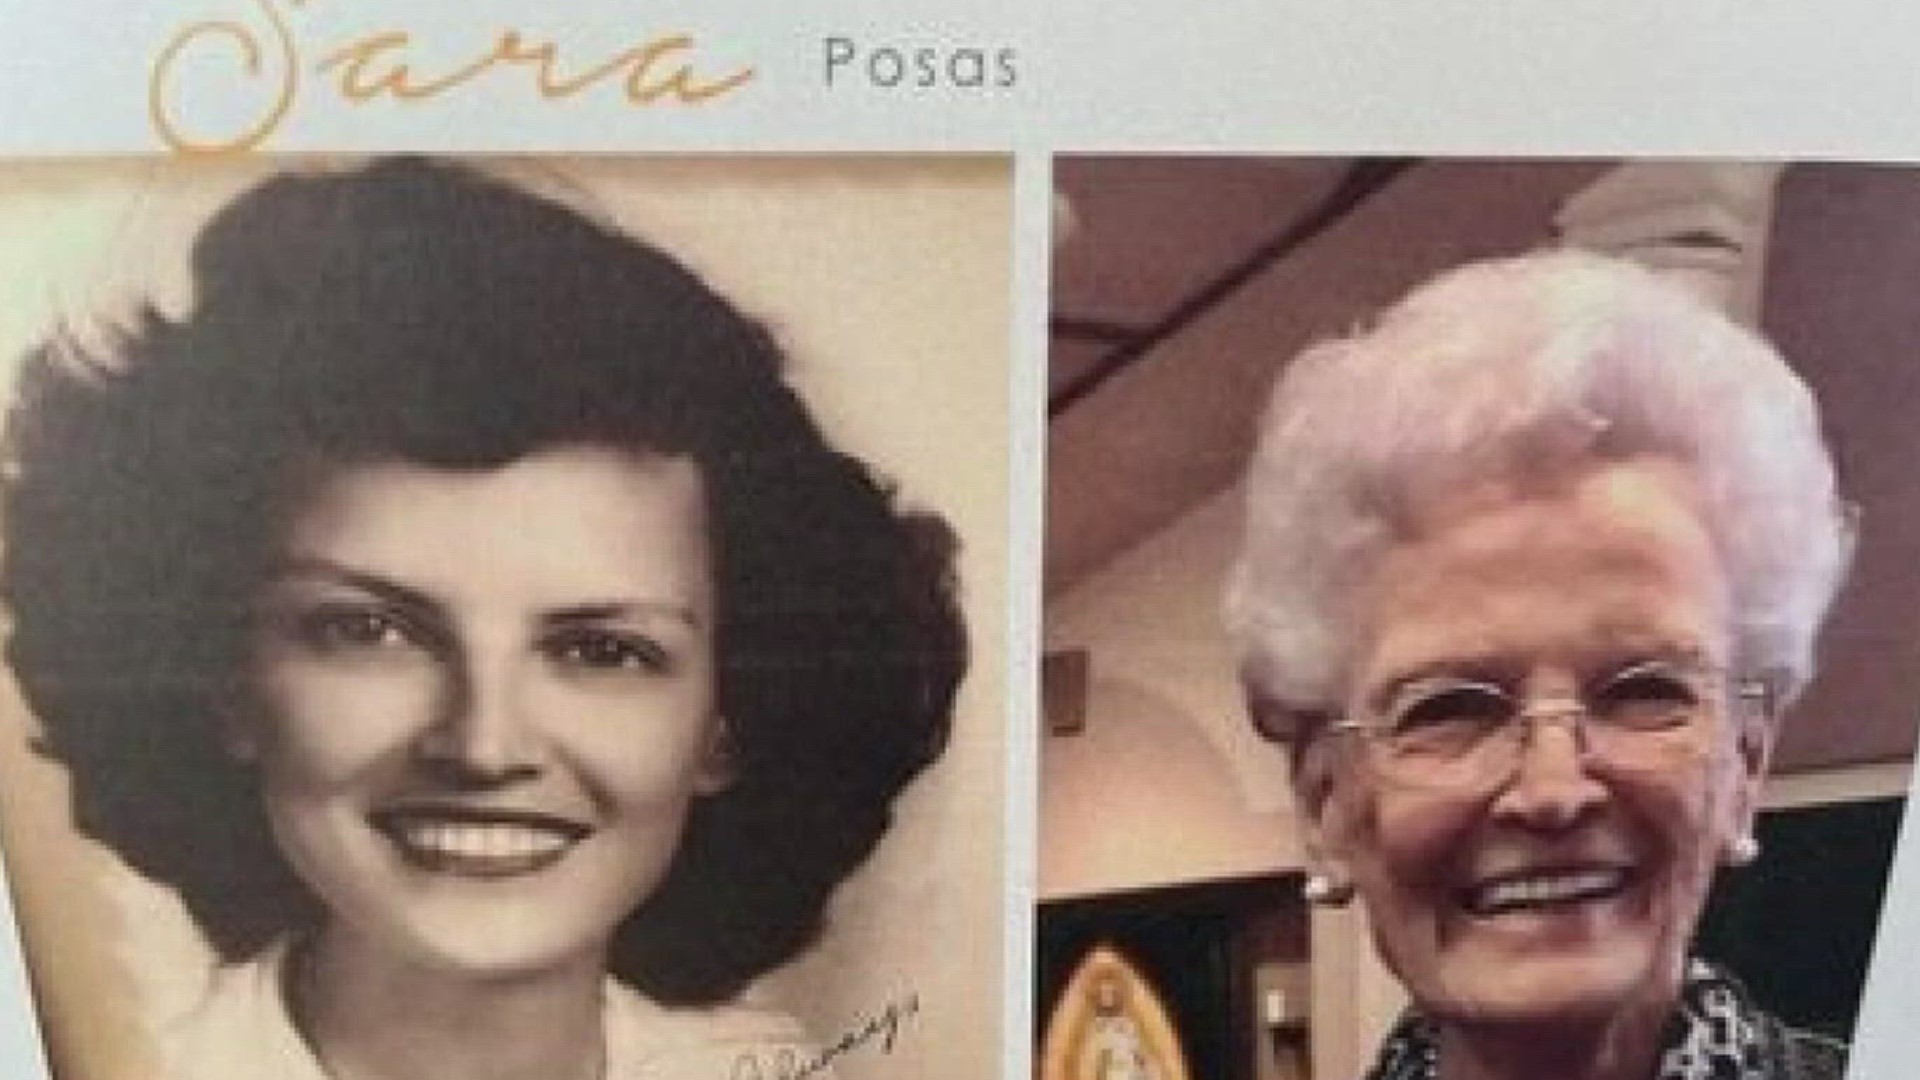 According to her family, Posas was "instrumental" in having her brother-in-law, Felix Longoria, buried at the Arlington National Cemetery in Virginia.